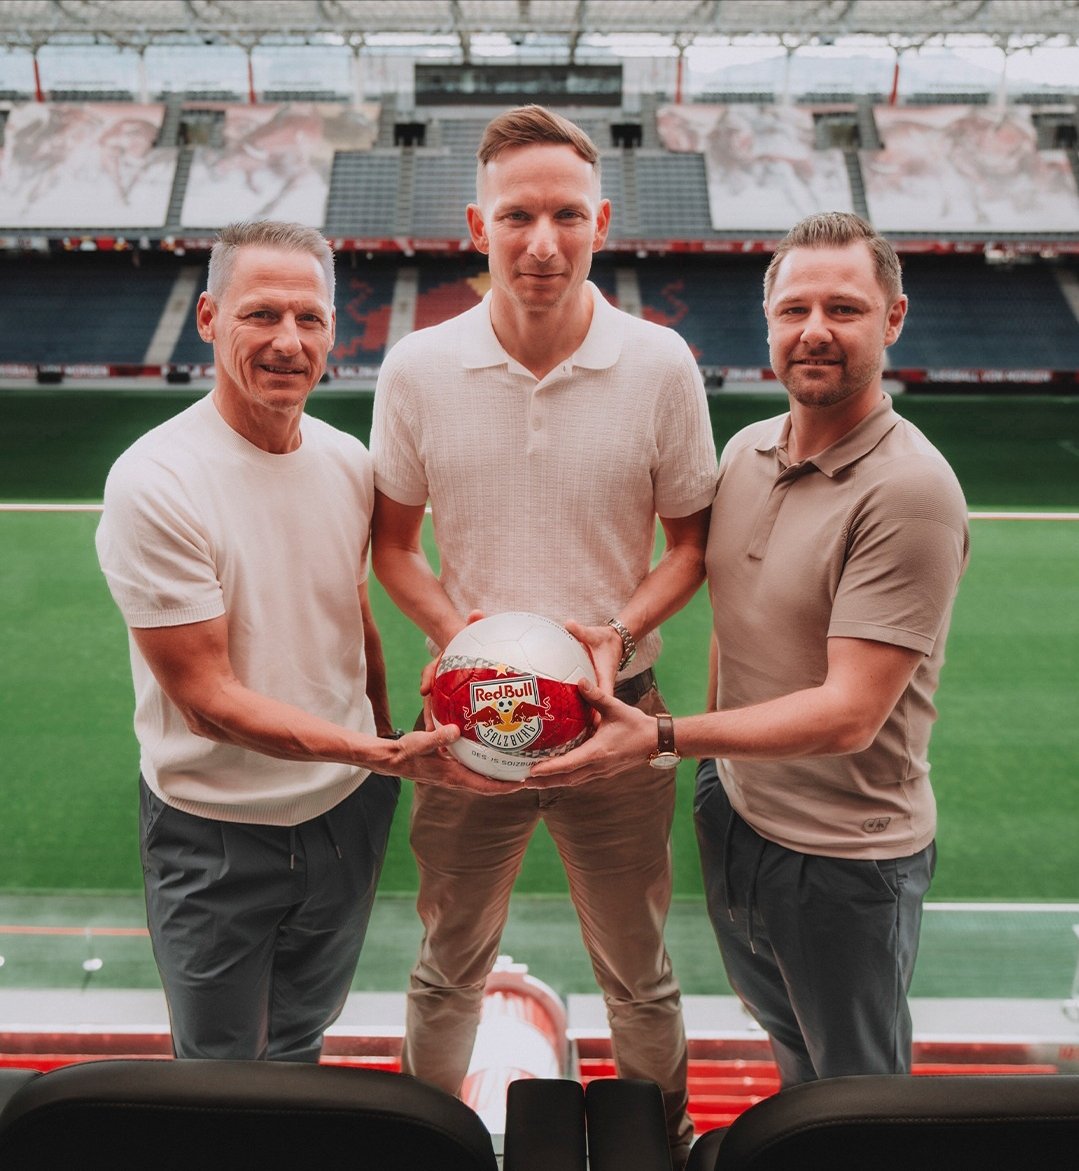 OFFICIAL NEWS 
Pep Lijnders is the New Head coach of Red Bull Salzburg.
Lijnders, 41 years old, has been for many years the Main assistant coach of Jurgen Klopp at Liverpool.
Holland coach signs contract until June 2027.
#allenaremania #redbullsalzburg  #peplijnders